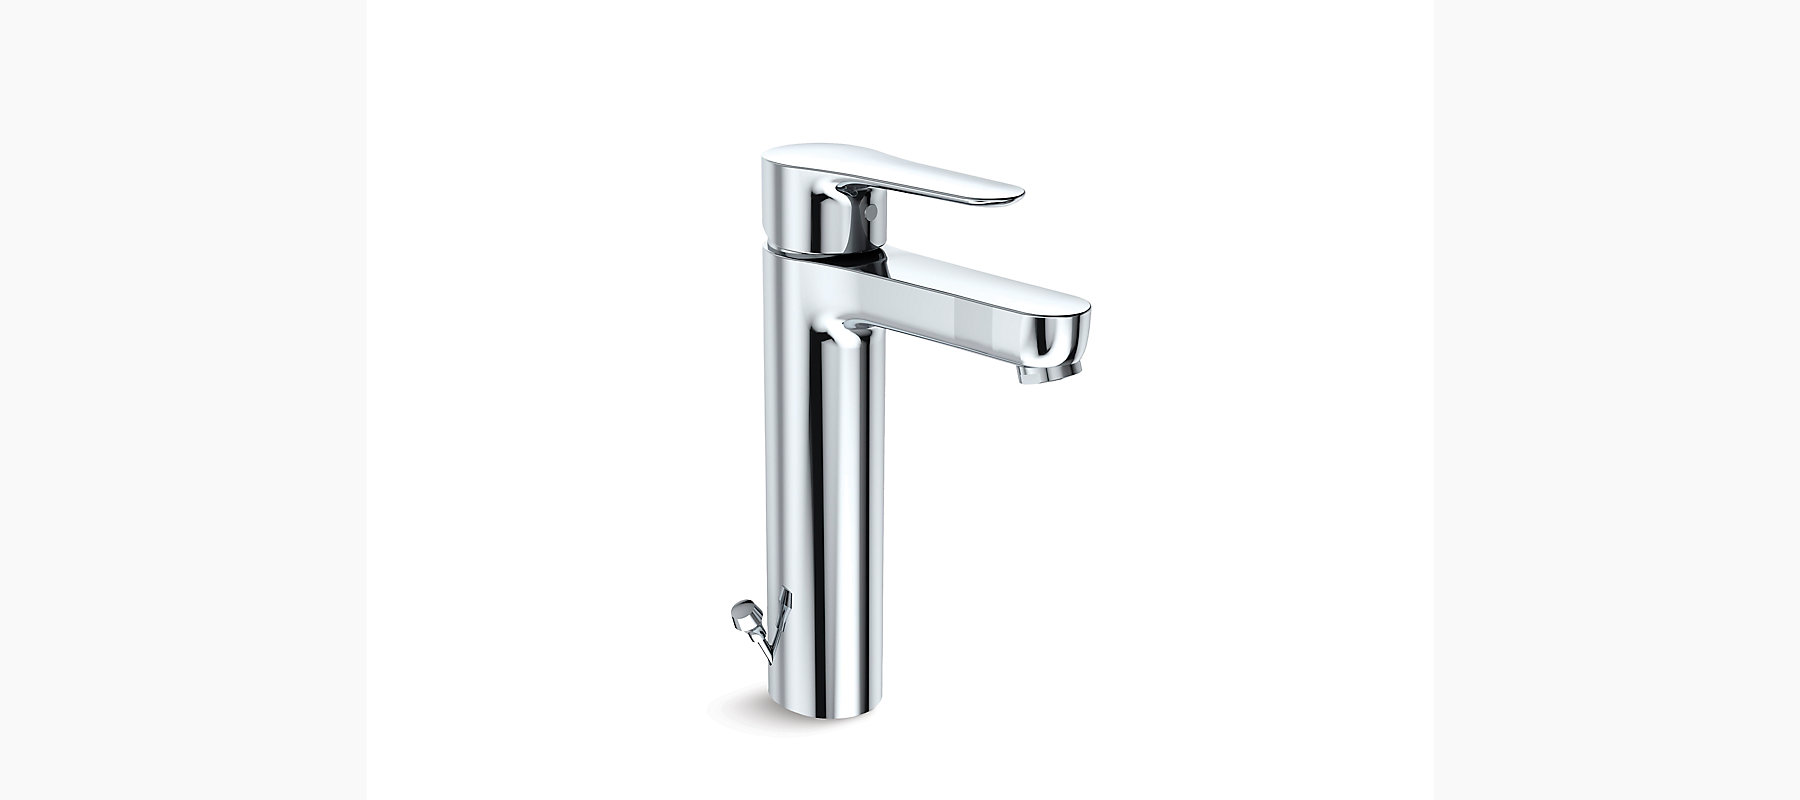 july-single-control-tall-lavatory-faucet-k-15238in-4nd-kohler